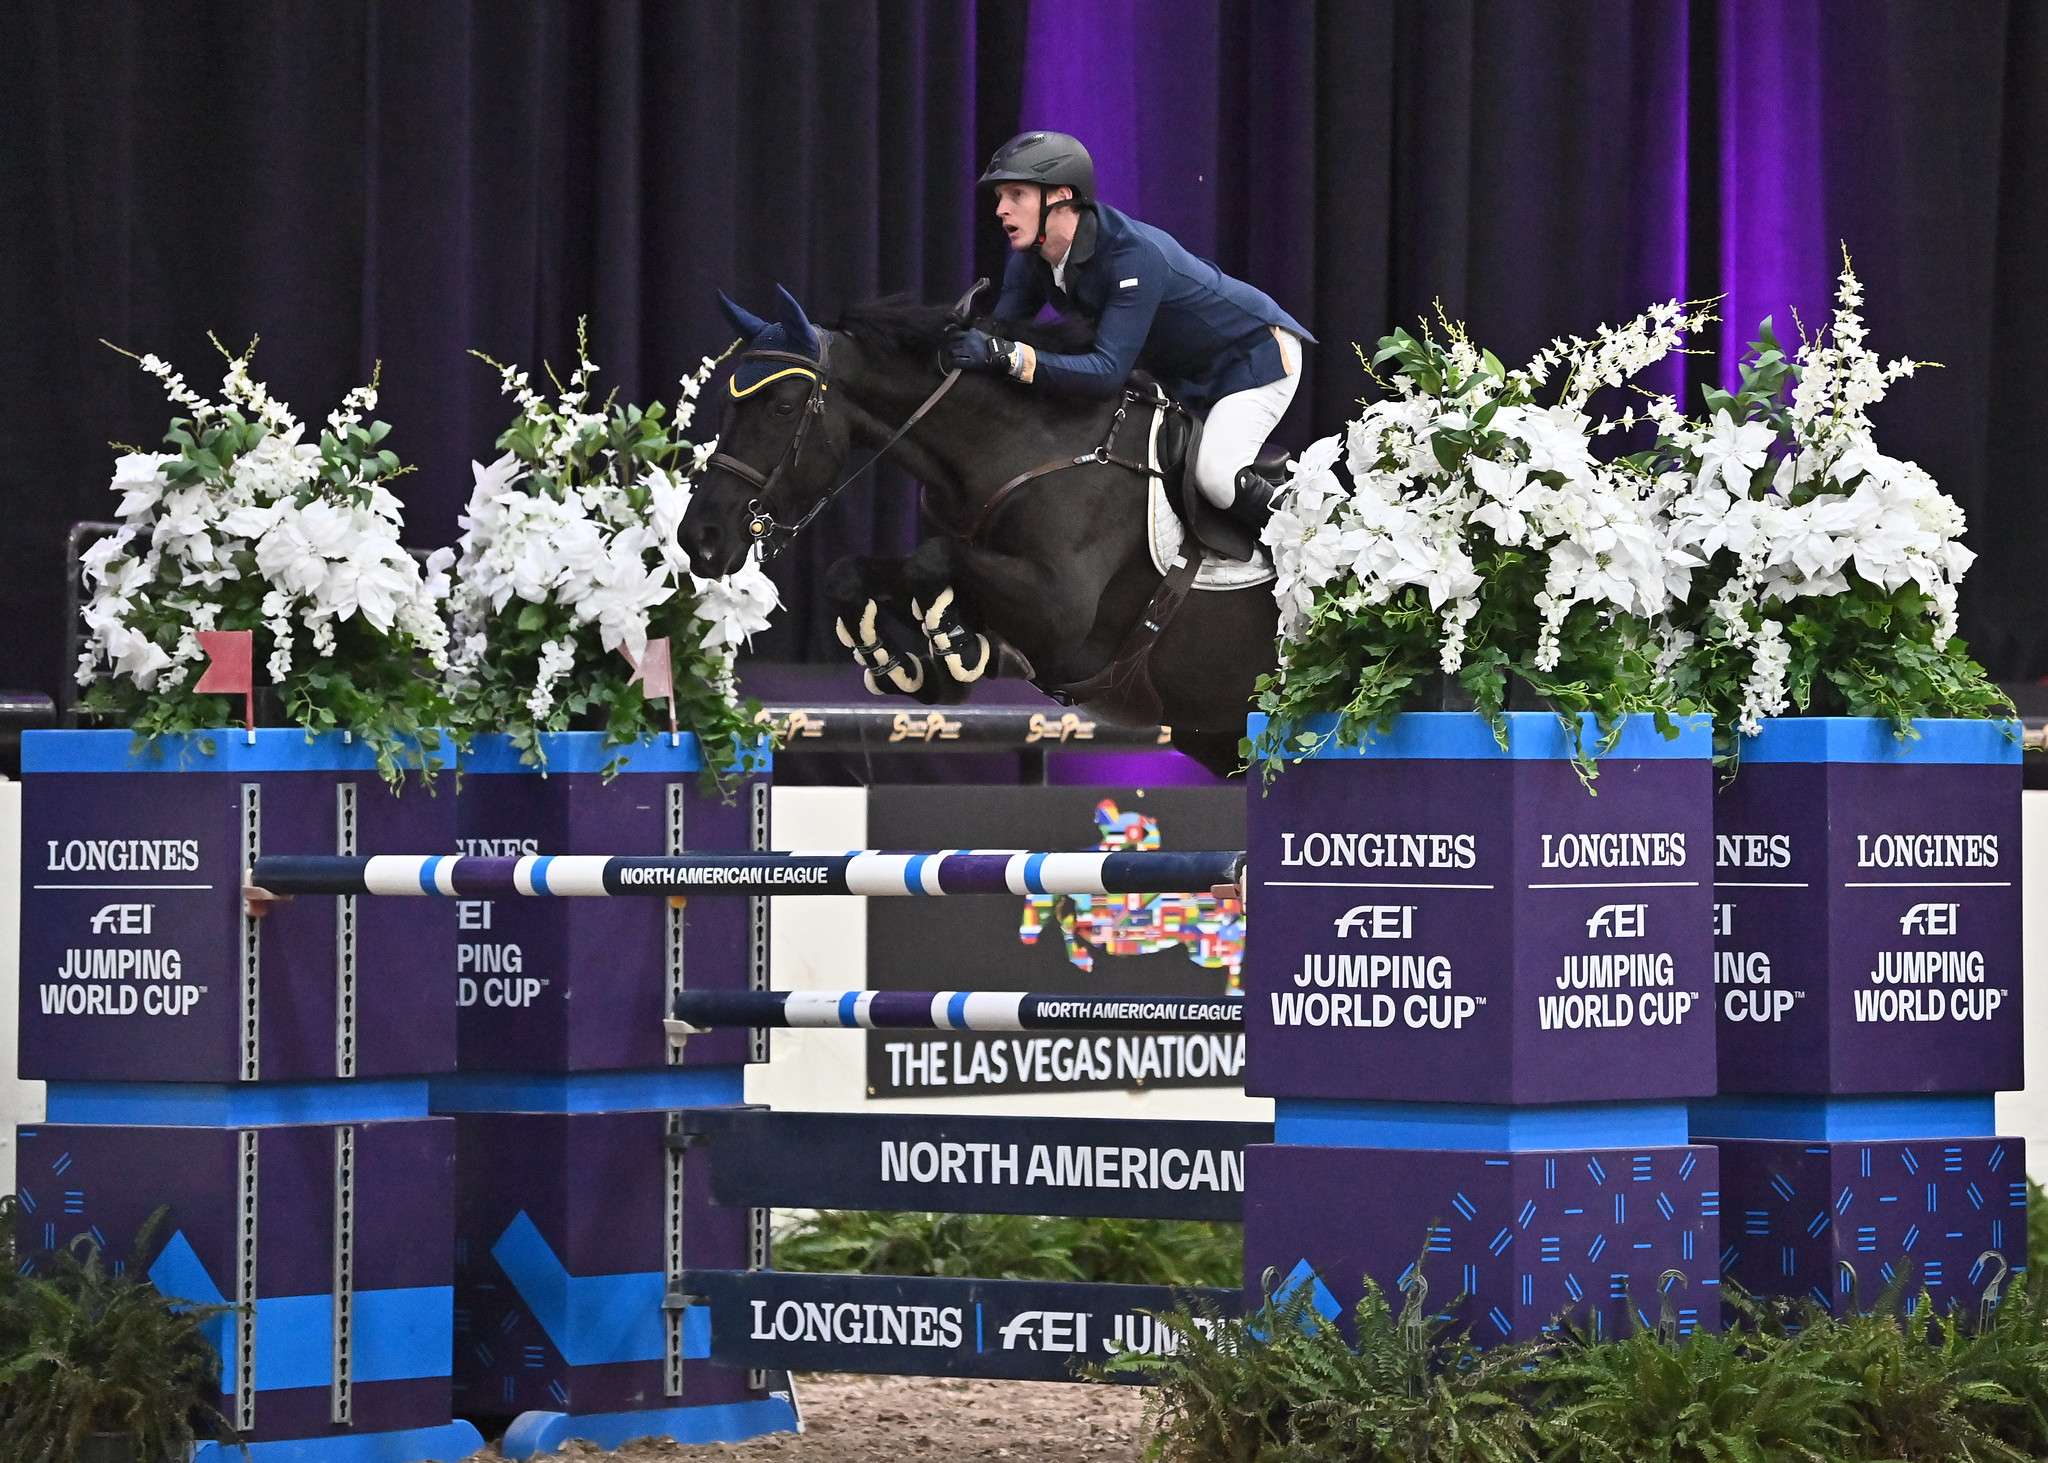 Longines FEI Jumping World Cup™ Las Vegas 2022 (USA)
Daniel Coyle and Ivory TCS during the Longines FEI Jumping World Cup™ Las Vegas USA on November 19, 2022
FEI / Andrew Ryback Photography